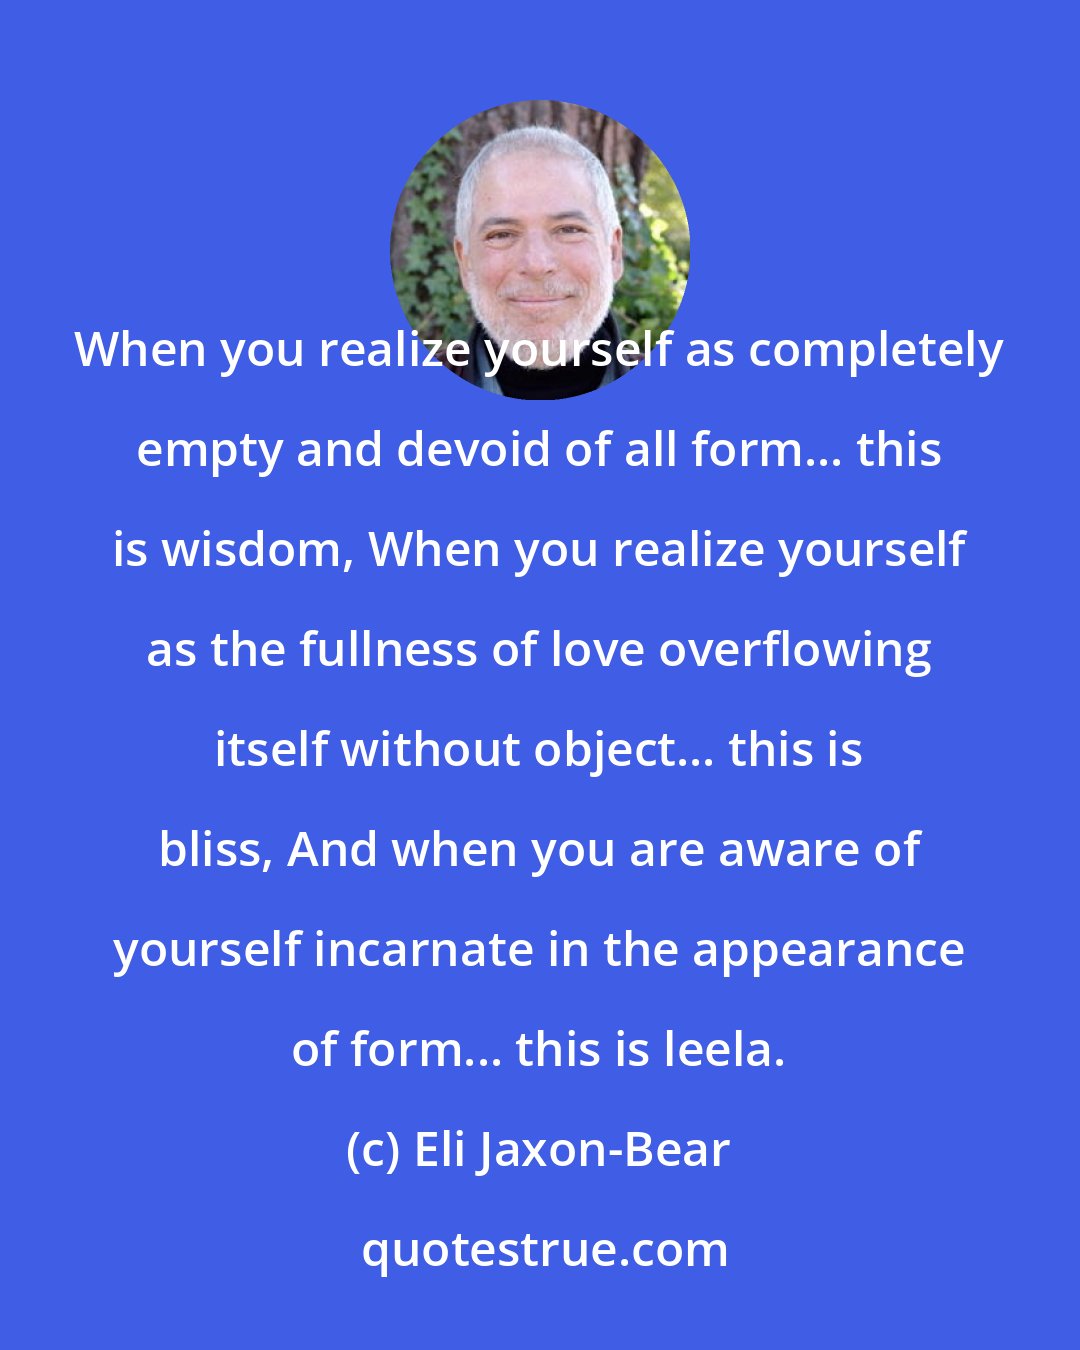 Eli Jaxon-Bear: When you realize yourself as completely empty and devoid of all form... this is wisdom, When you realize yourself as the fullness of love overflowing itself without object... this is bliss, And when you are aware of yourself incarnate in the appearance of form... this is leela.